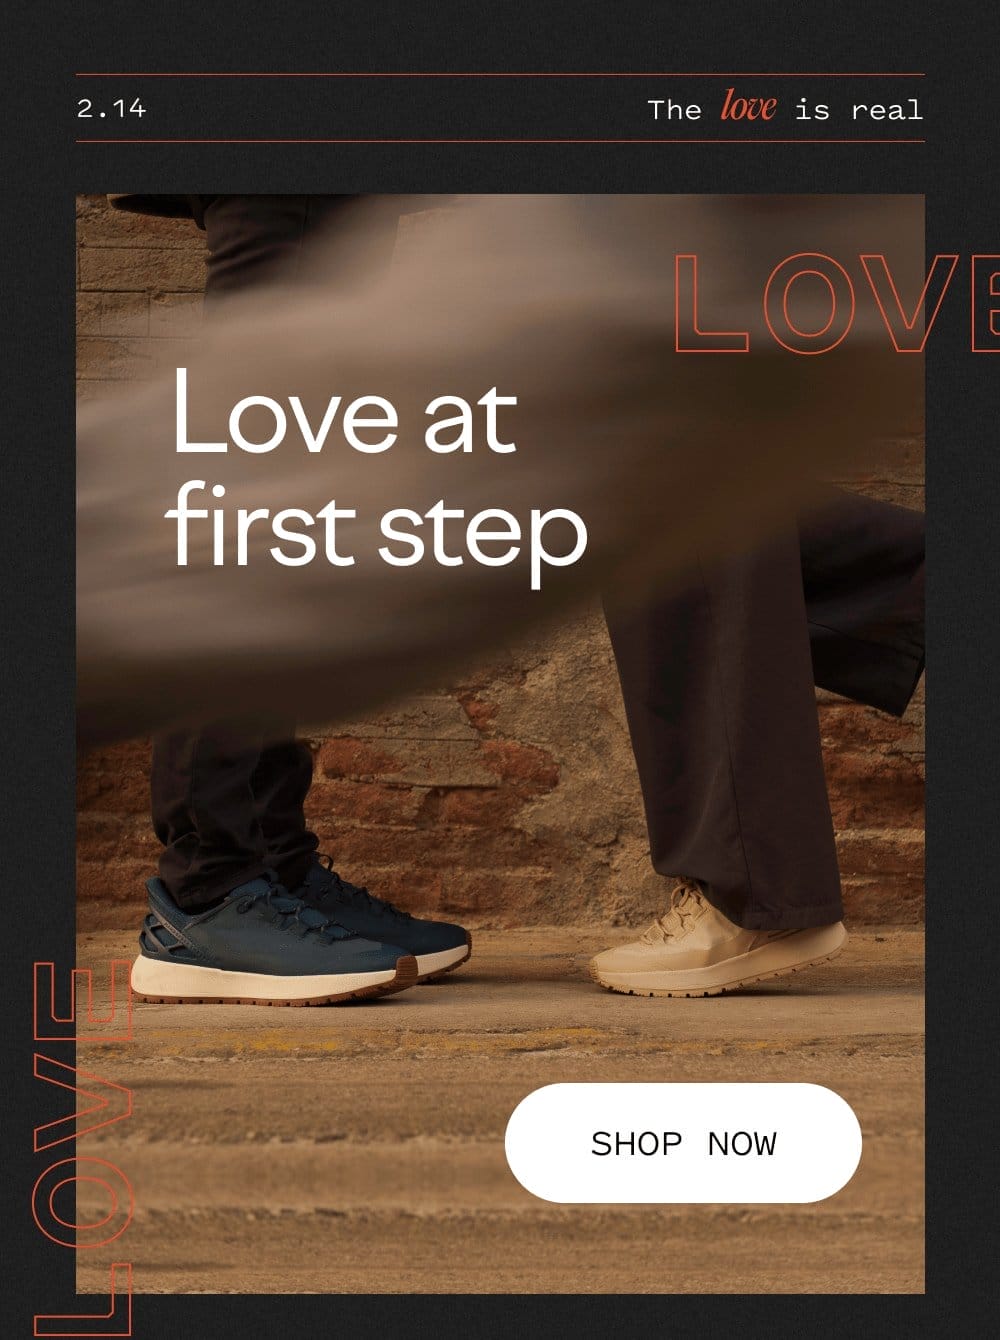 Love at first step - shop now